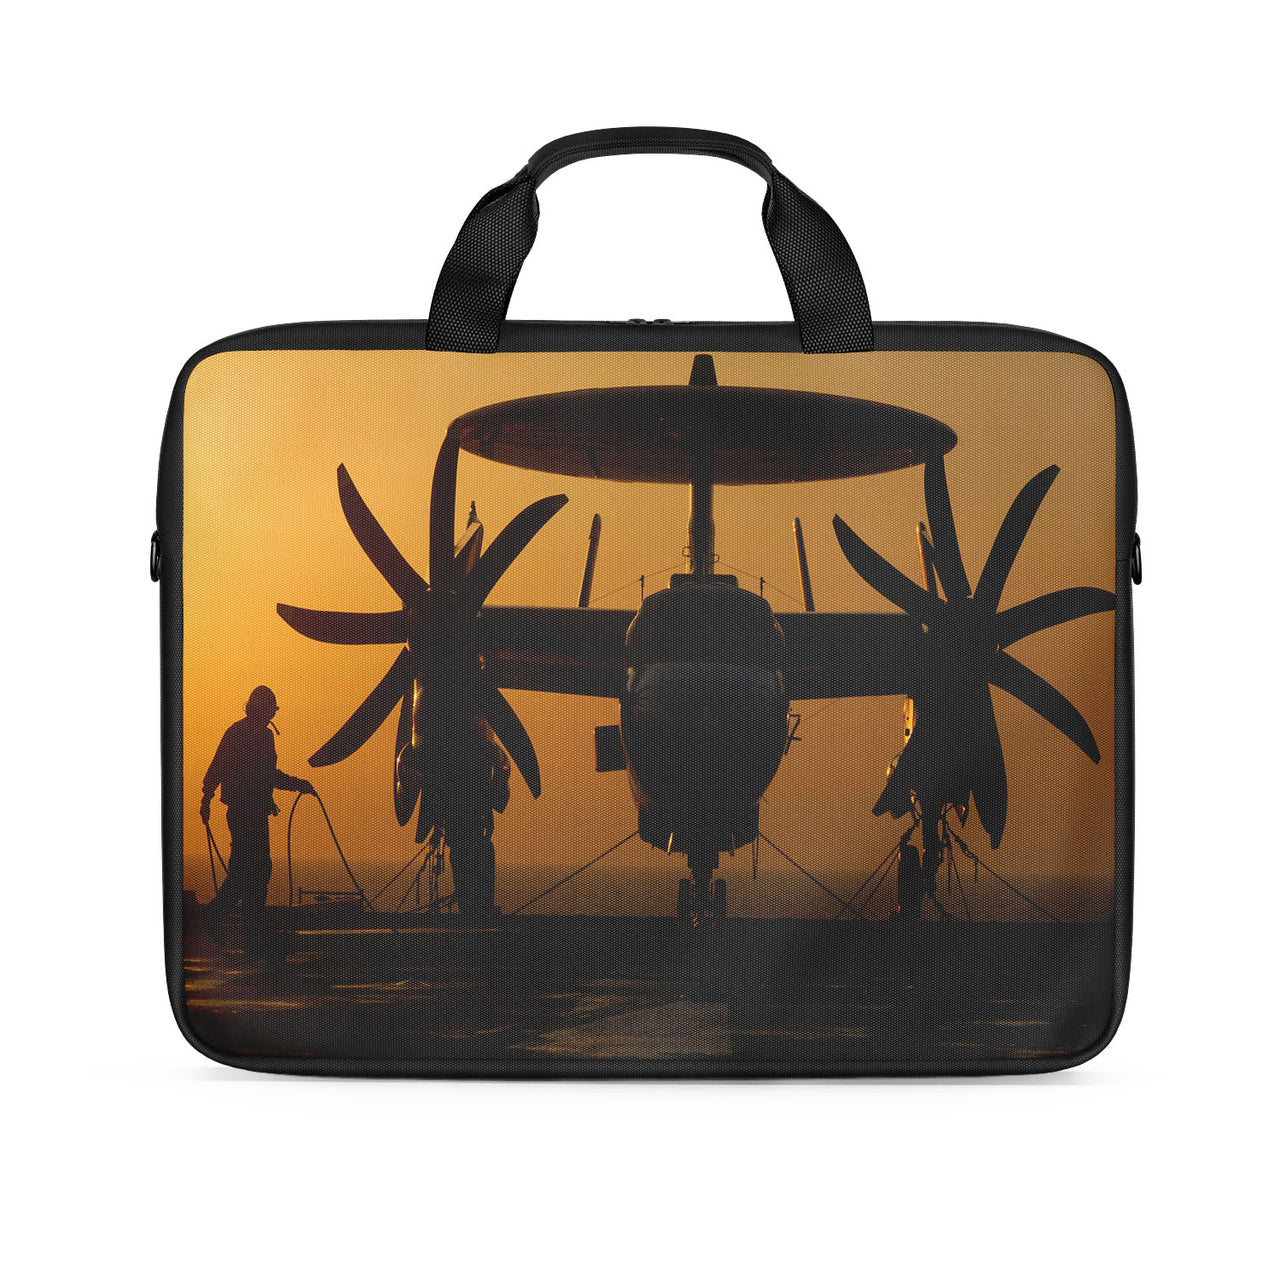 Military Plane at Sunset Designed Laptop & Tablet Bags